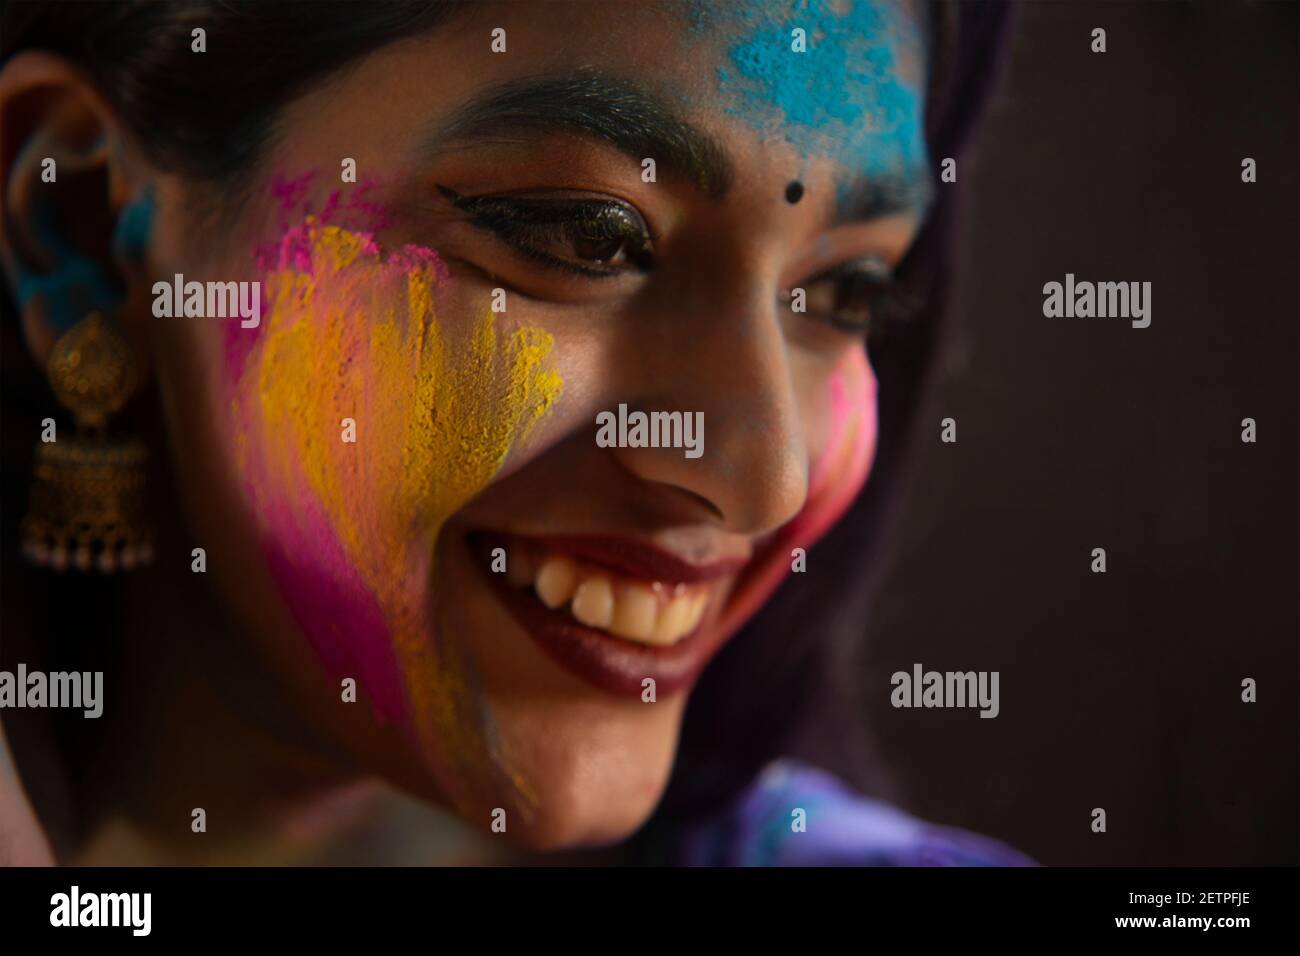 SIDE SHOT OF A HAPPY YOUNG WOMAN WITH GULAL ON HER FACE Stock Photo